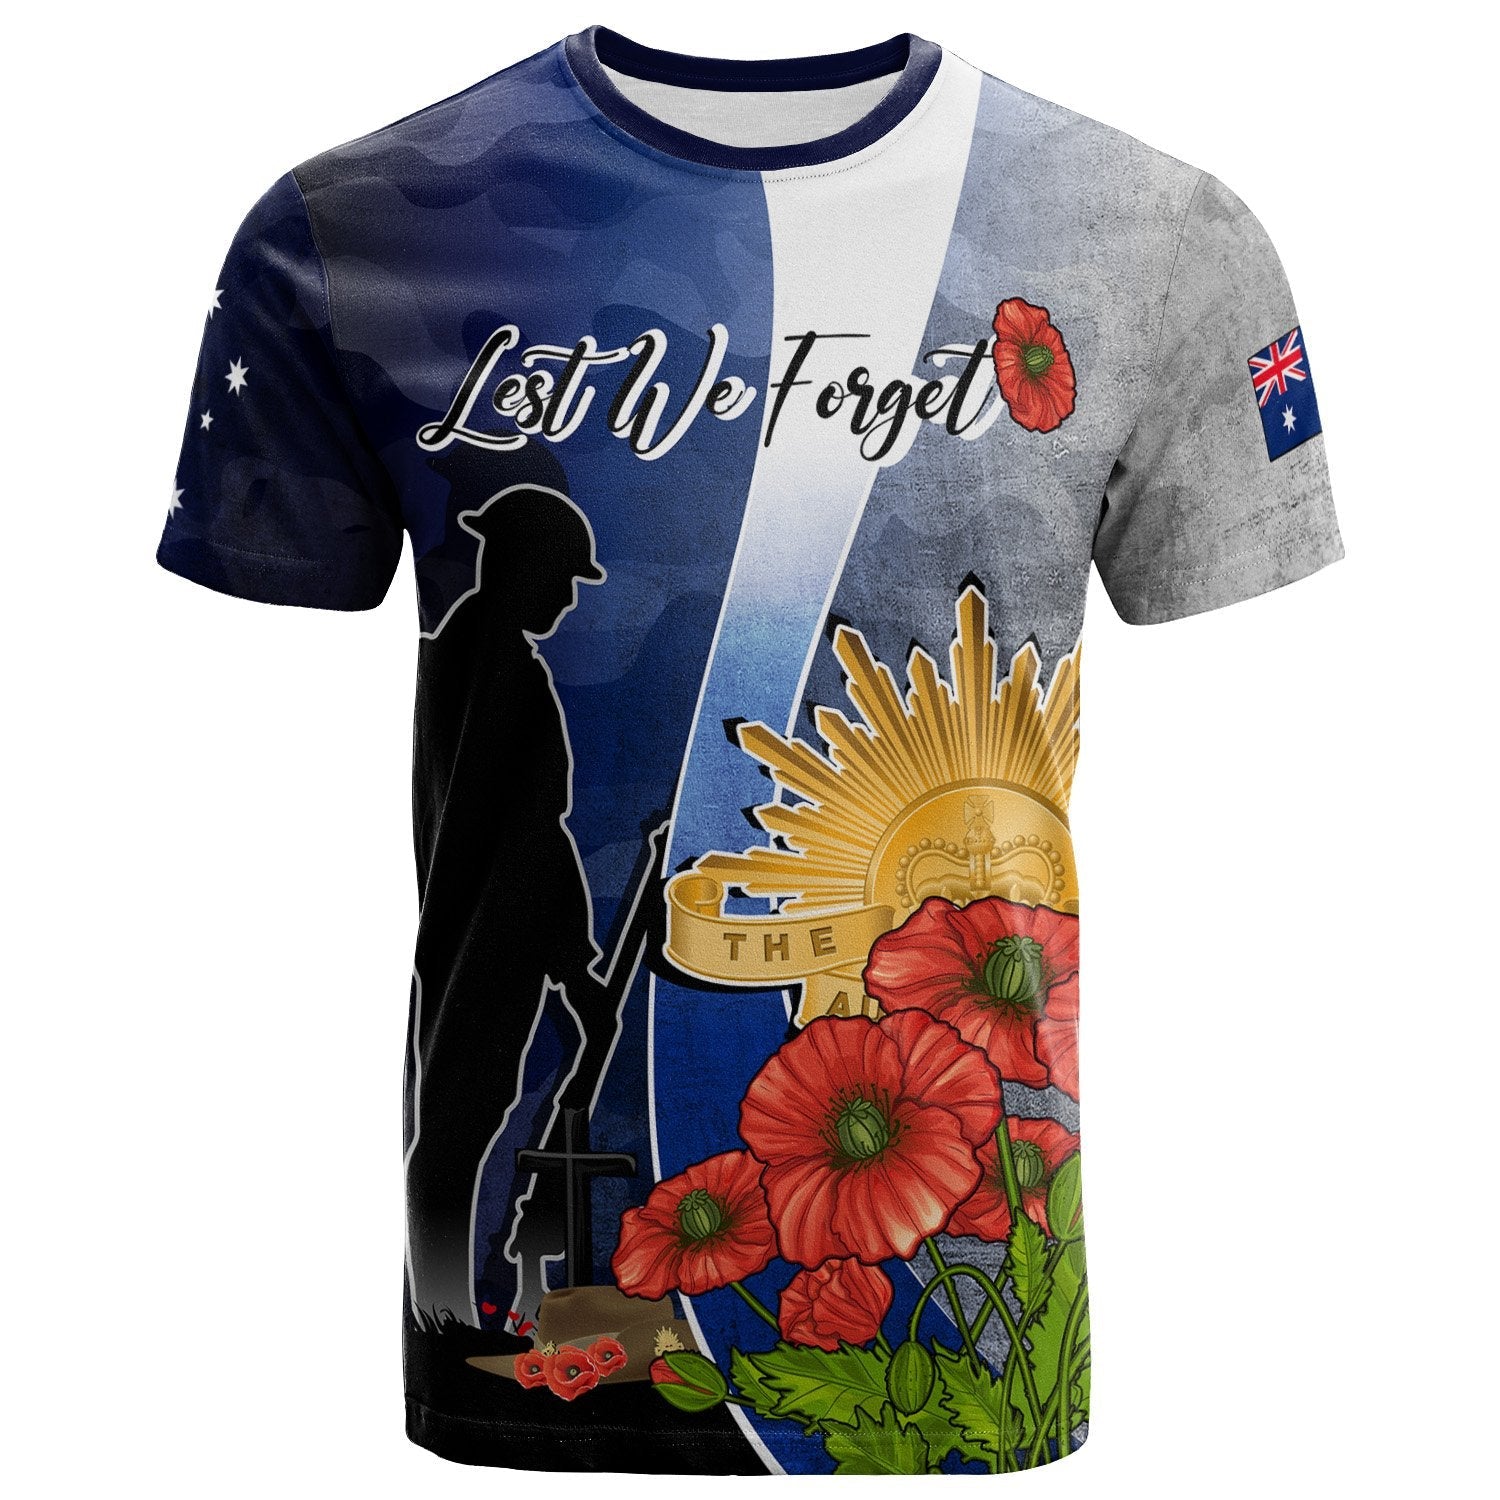 anzac-day-t-shirt-lest-we-forget-poppy-flower